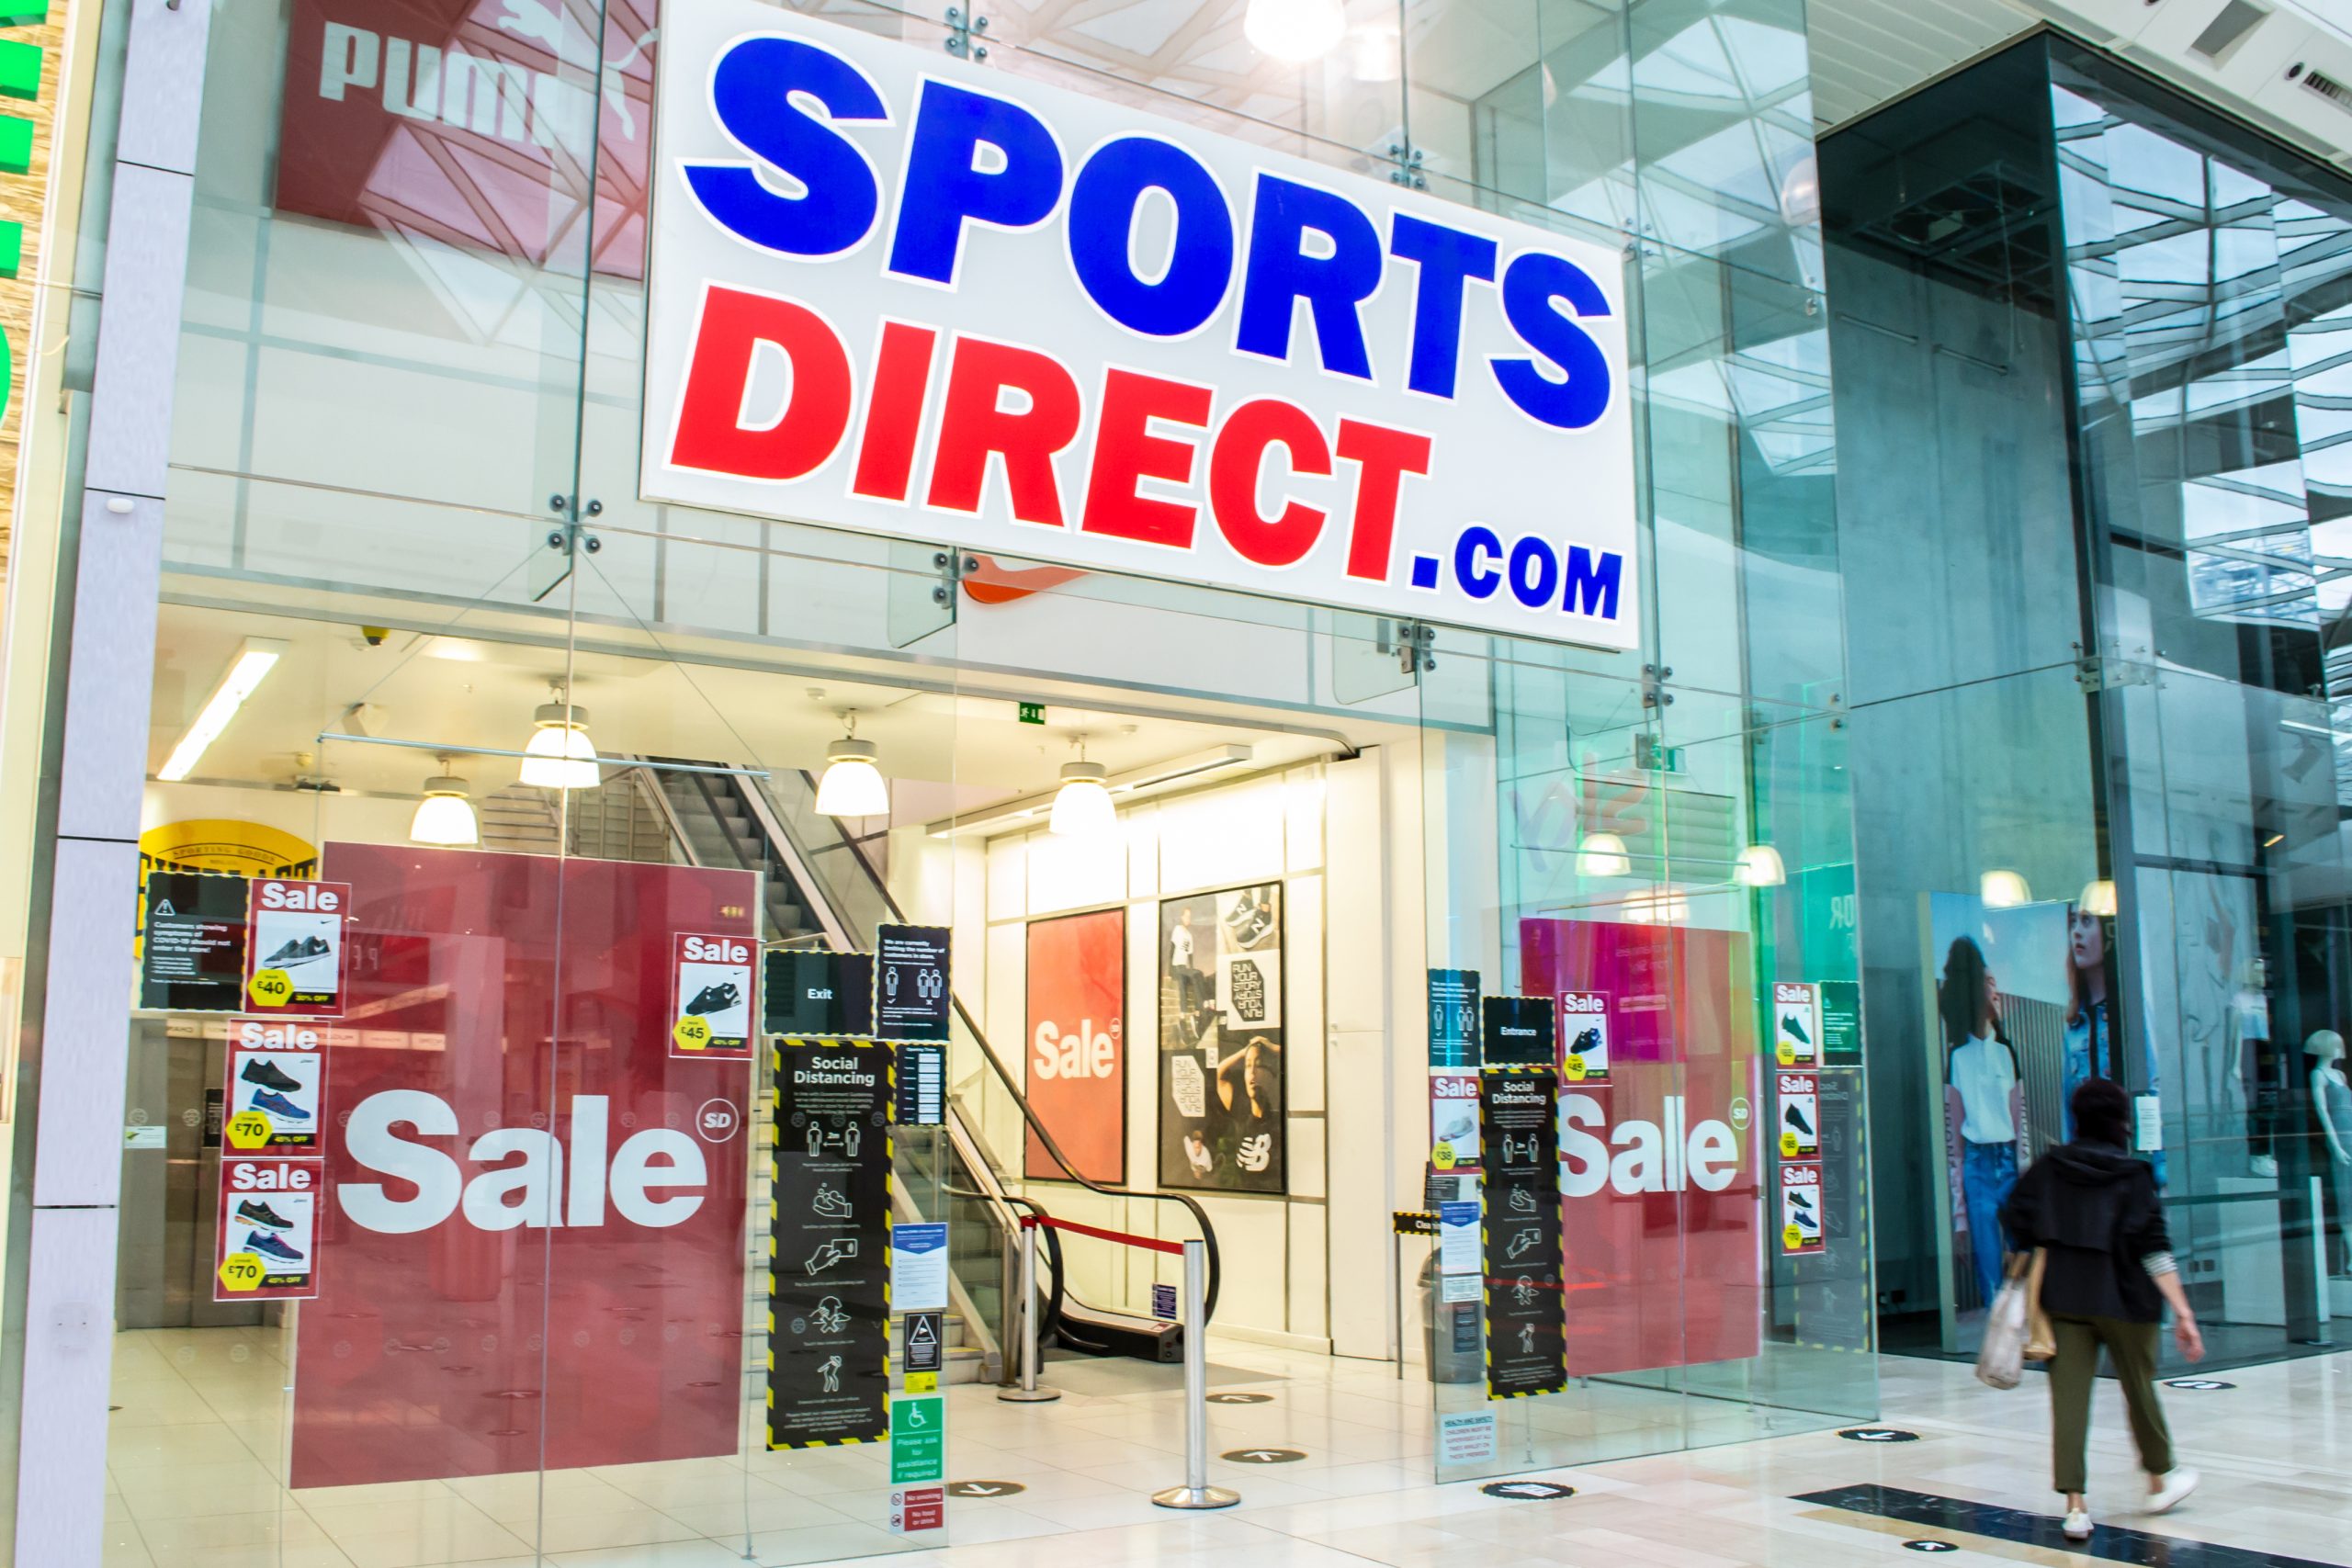 Frasers Group owned Sports Direct